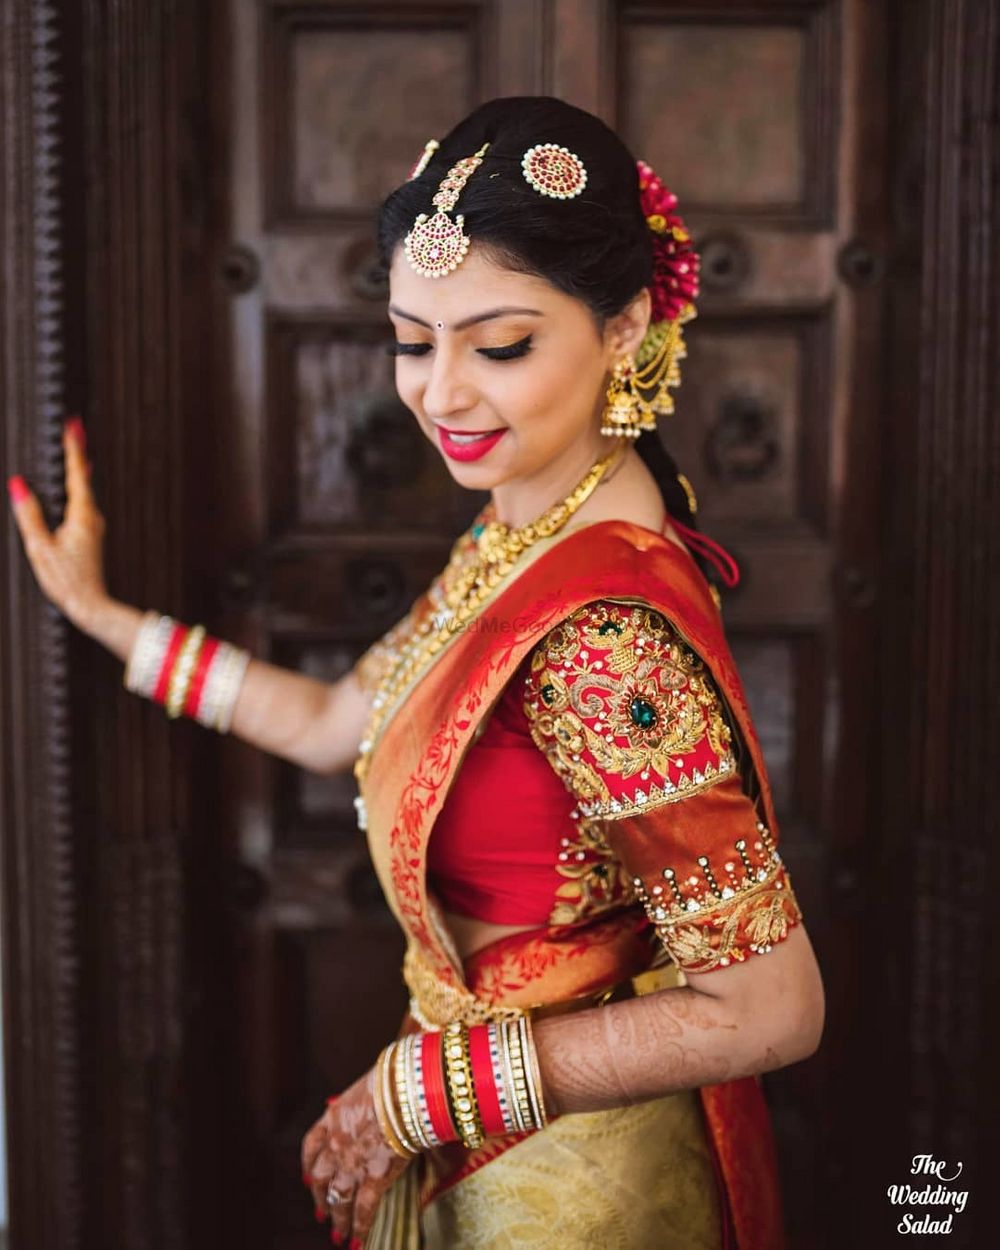 Photo of south indian bridal portrait wearing embroidered blouse in red